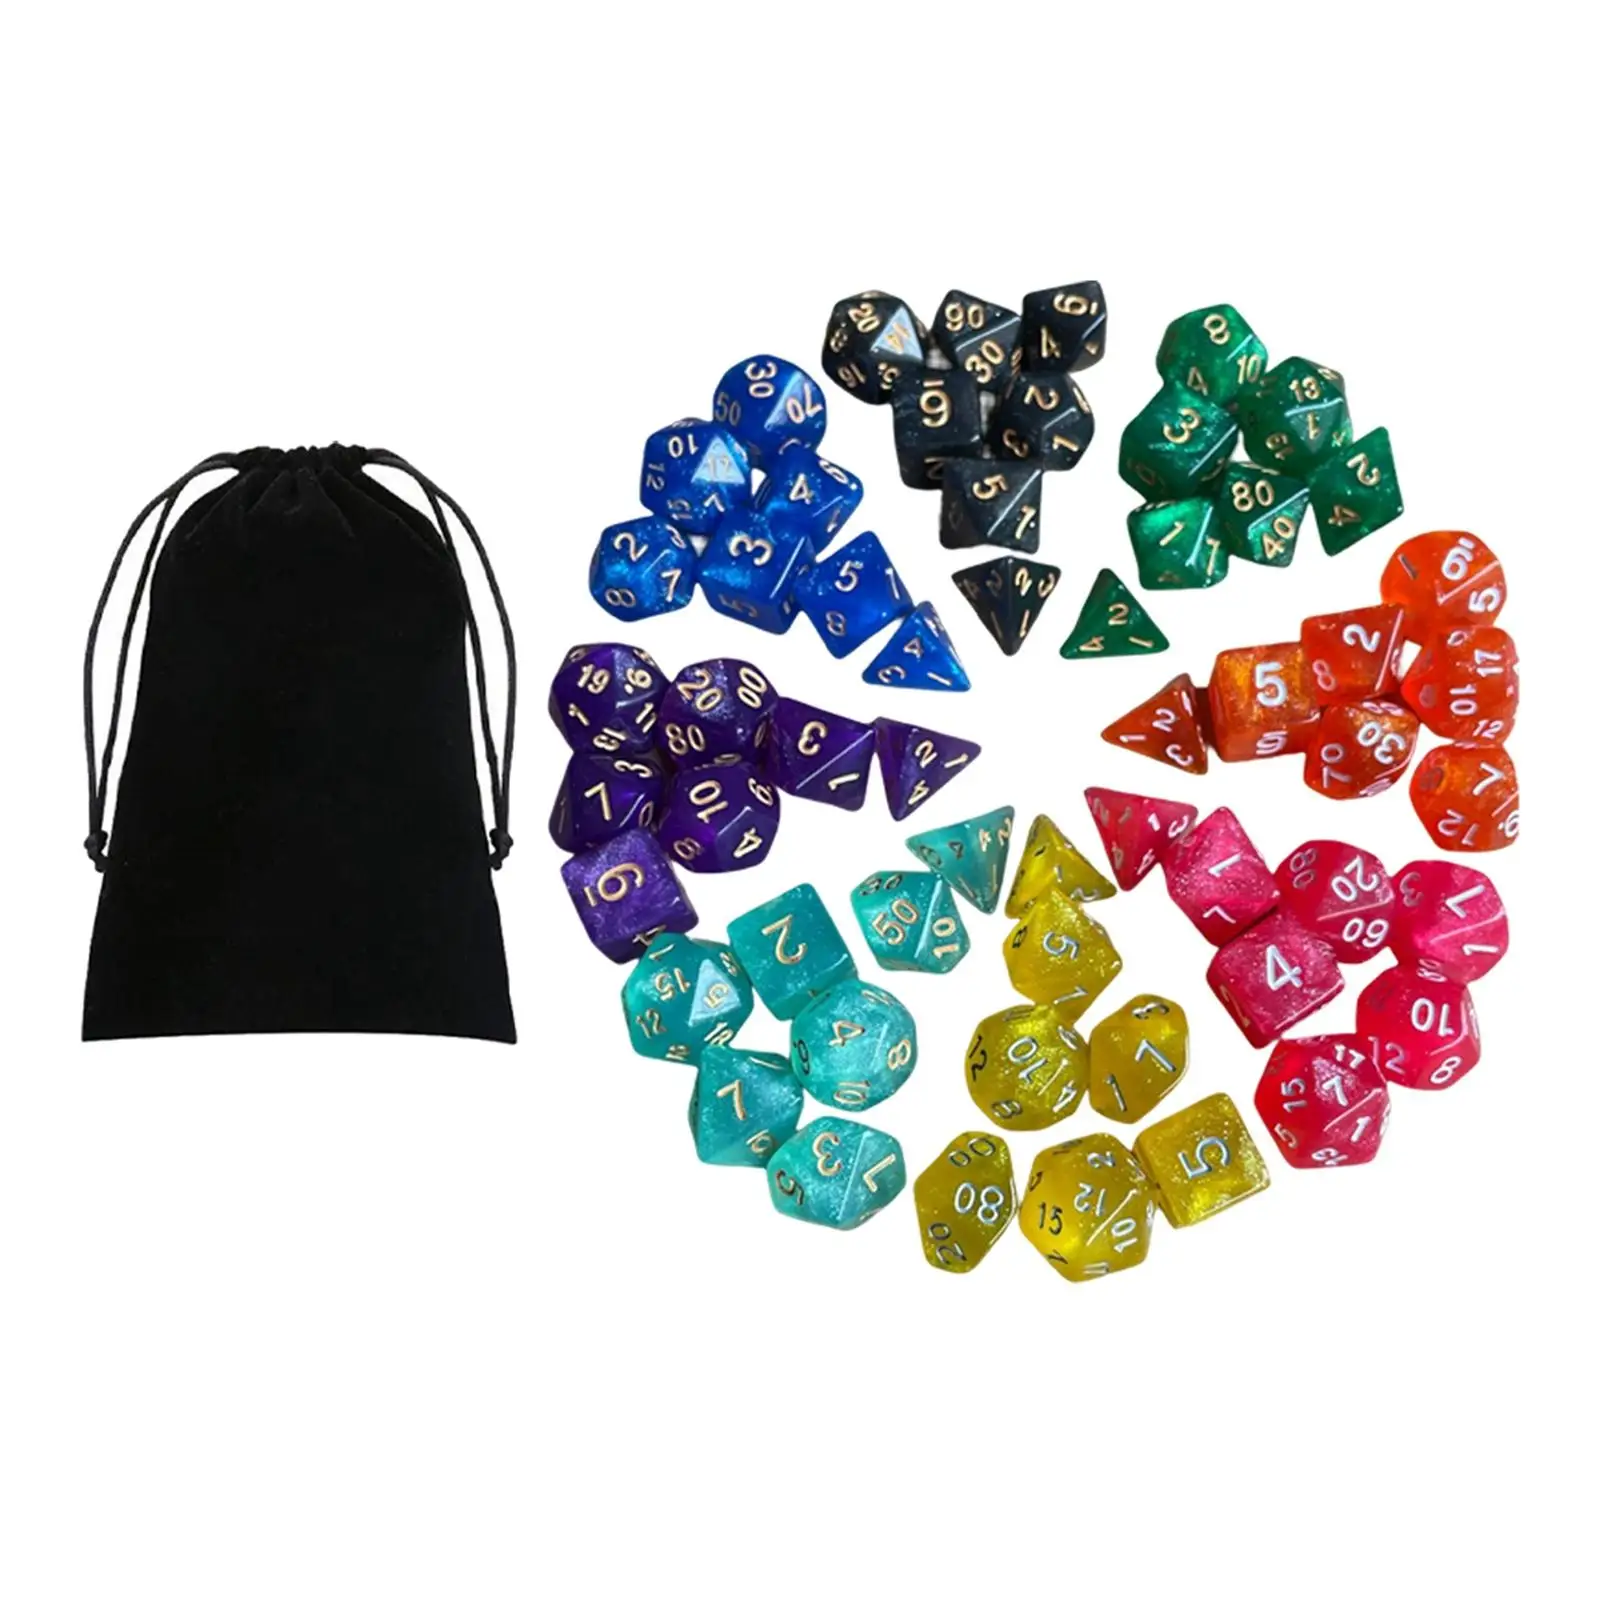 56Pcs Polyhedral Dices Toys Durable D8 D10 D12 D20 Rolling Dices for Parties Table Games Roll Playing Games Board Game Props KTV